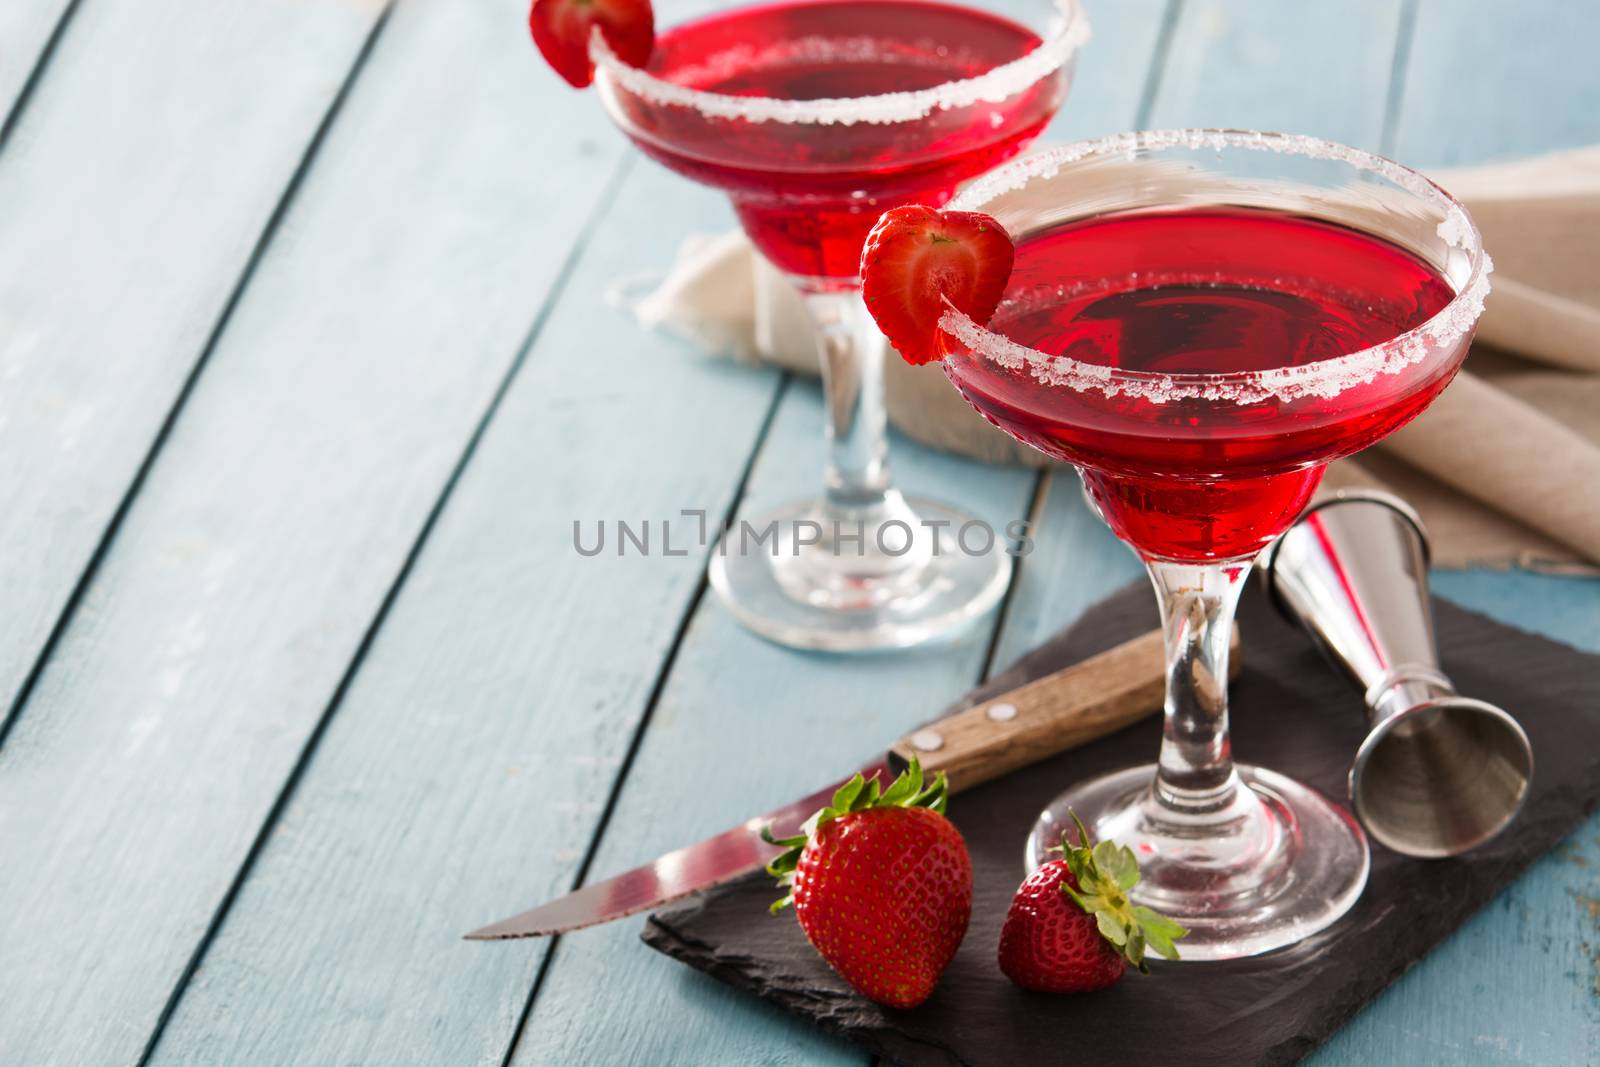 Strawberry cocktail drink in glass isolated on white background